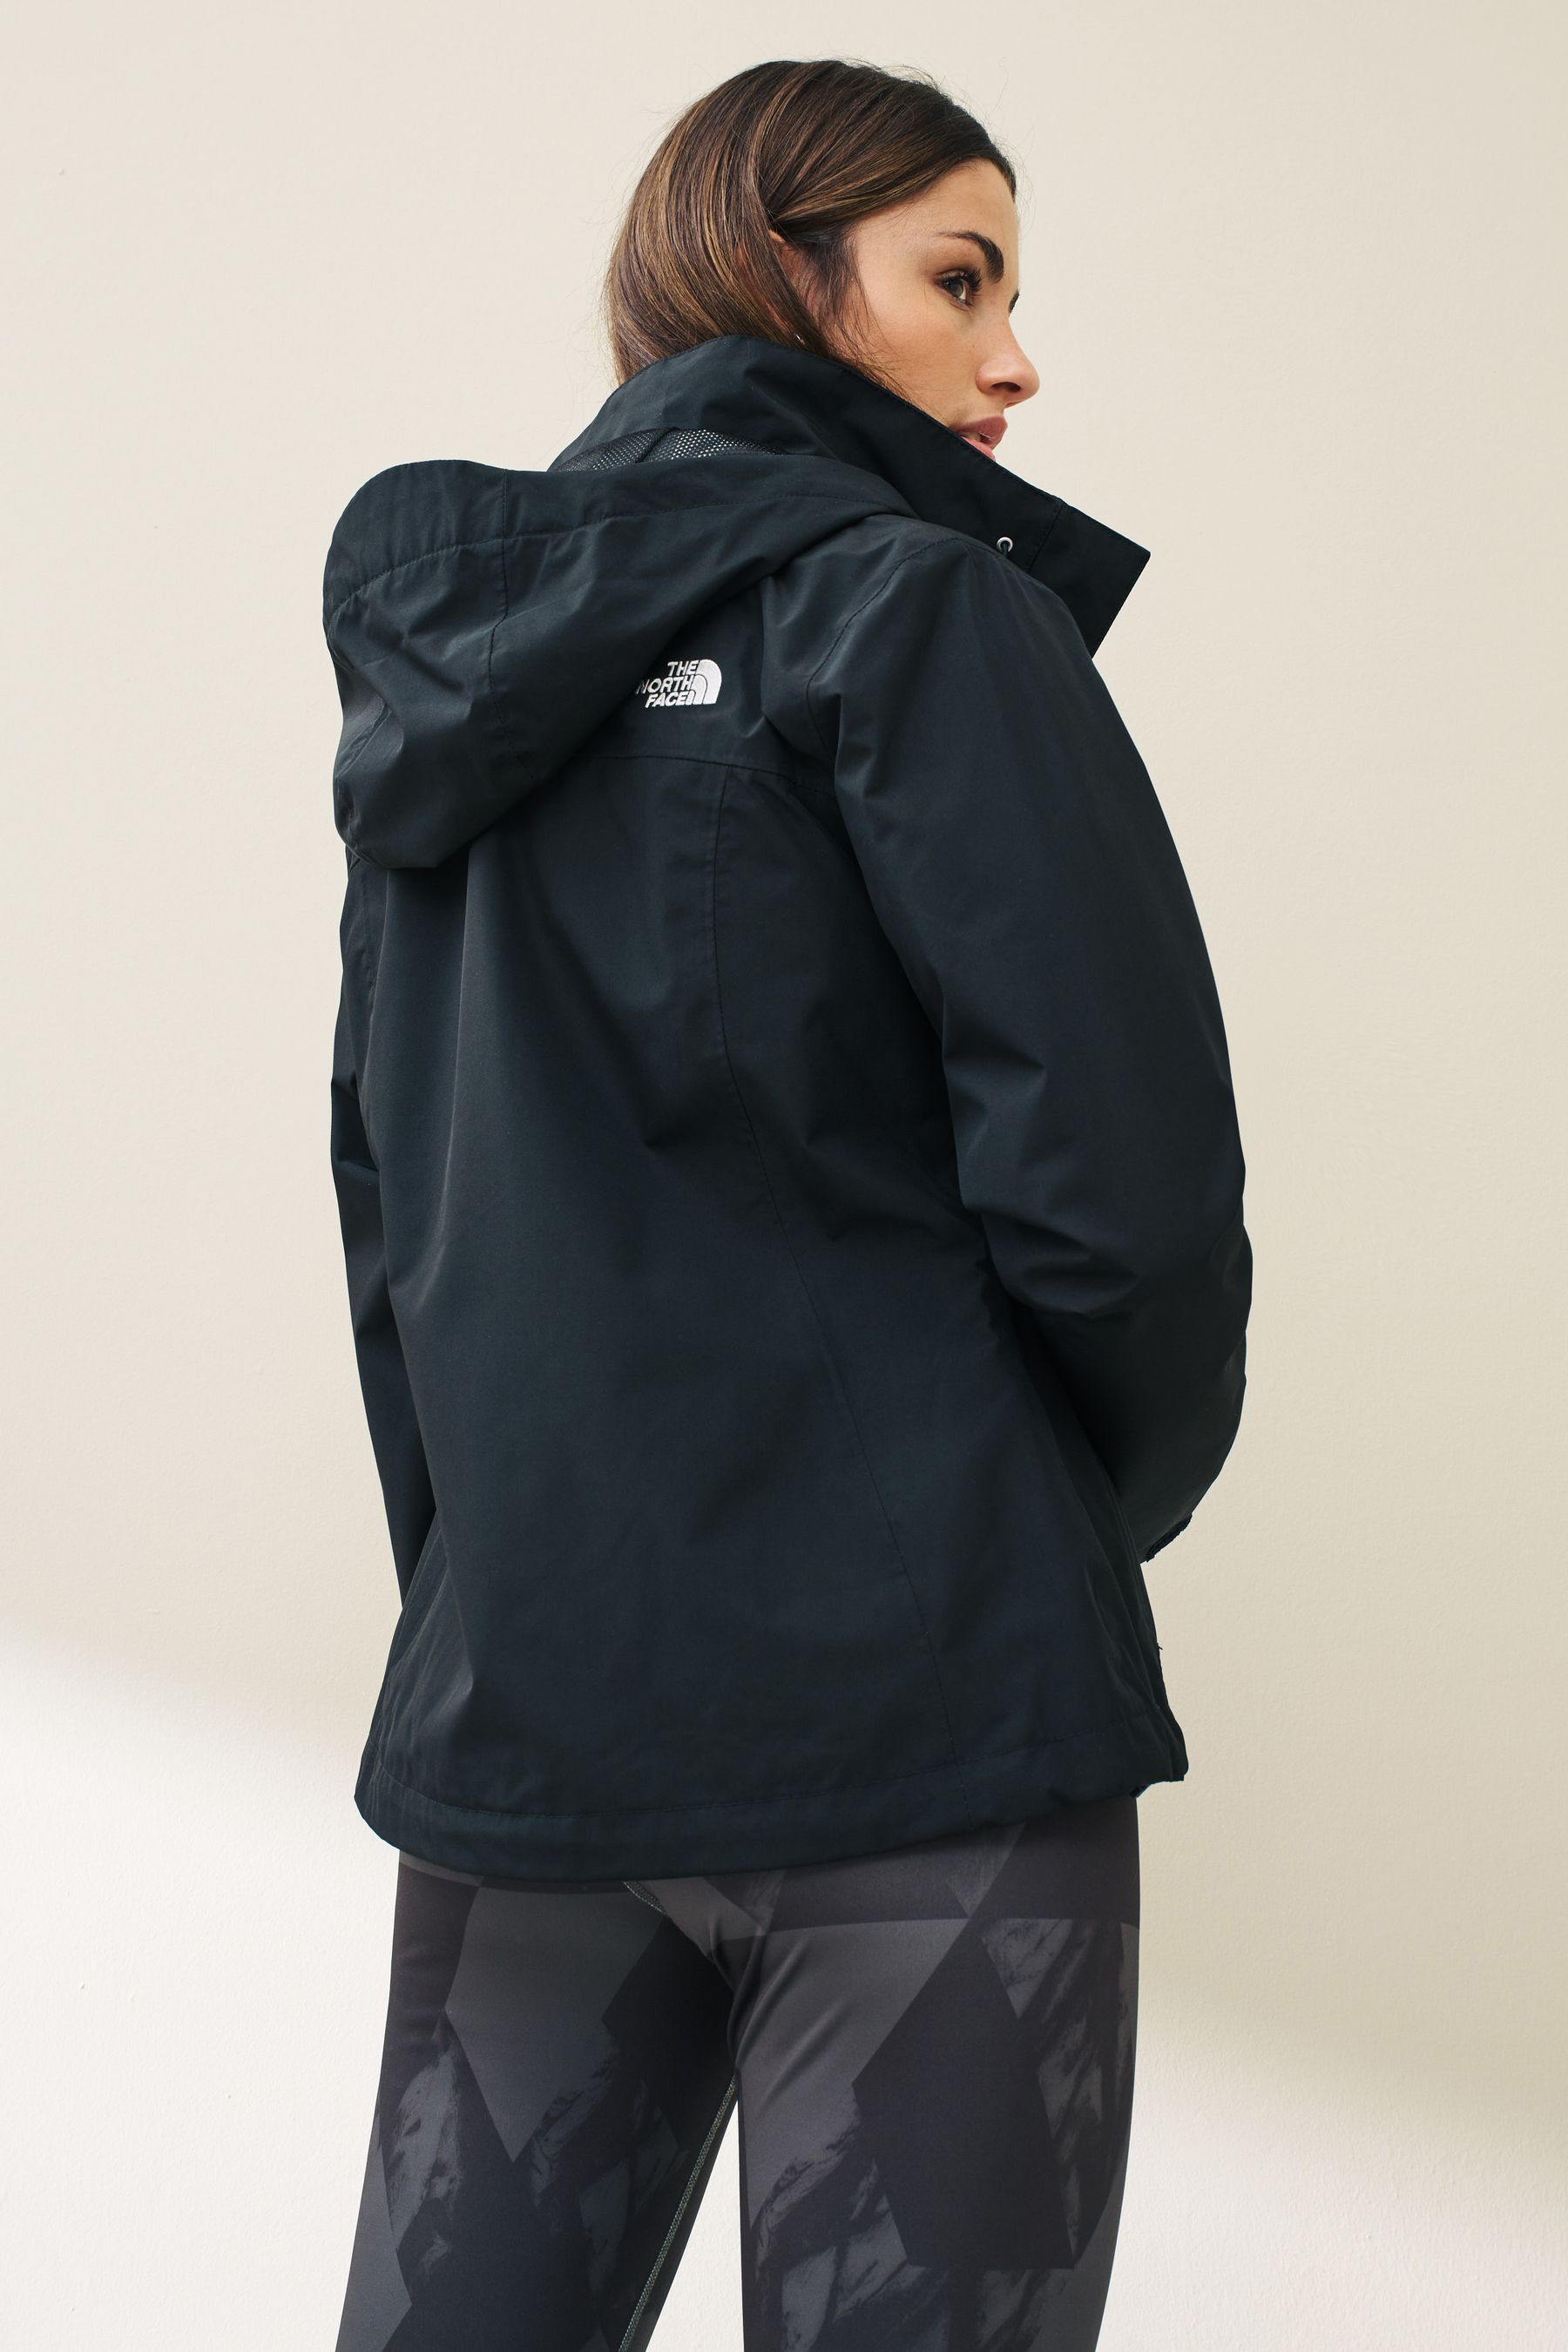 Buy The North Face Sangro Jacket from the Next UK online shop